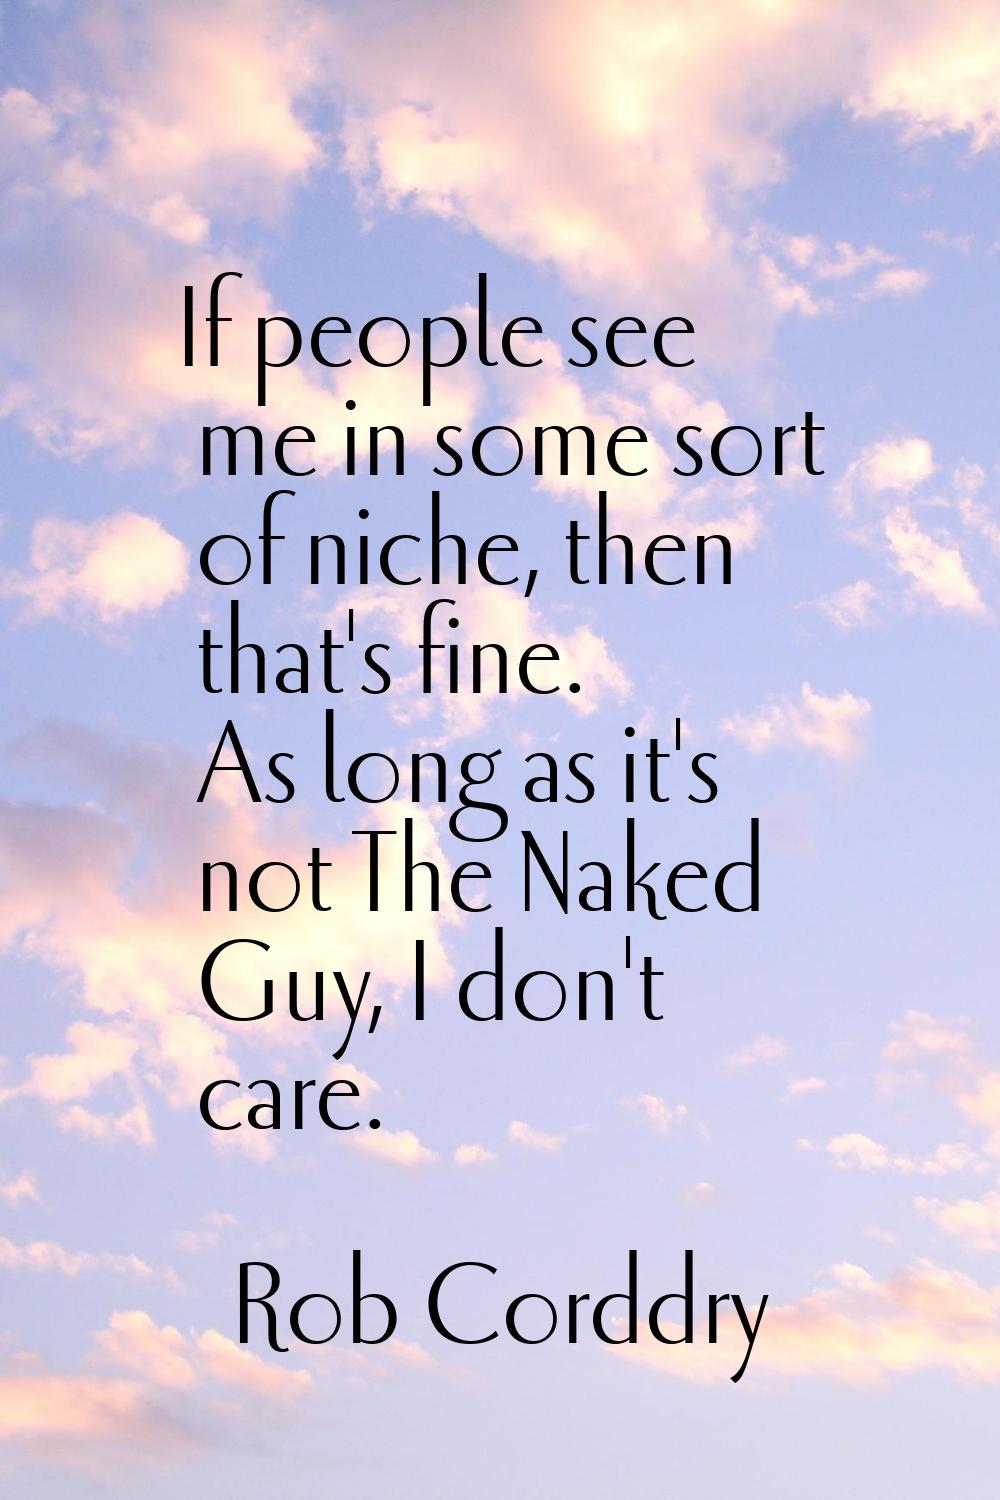 If people see me in some sort of niche, then that's fine. As long as it's not The Naked Guy, I don'